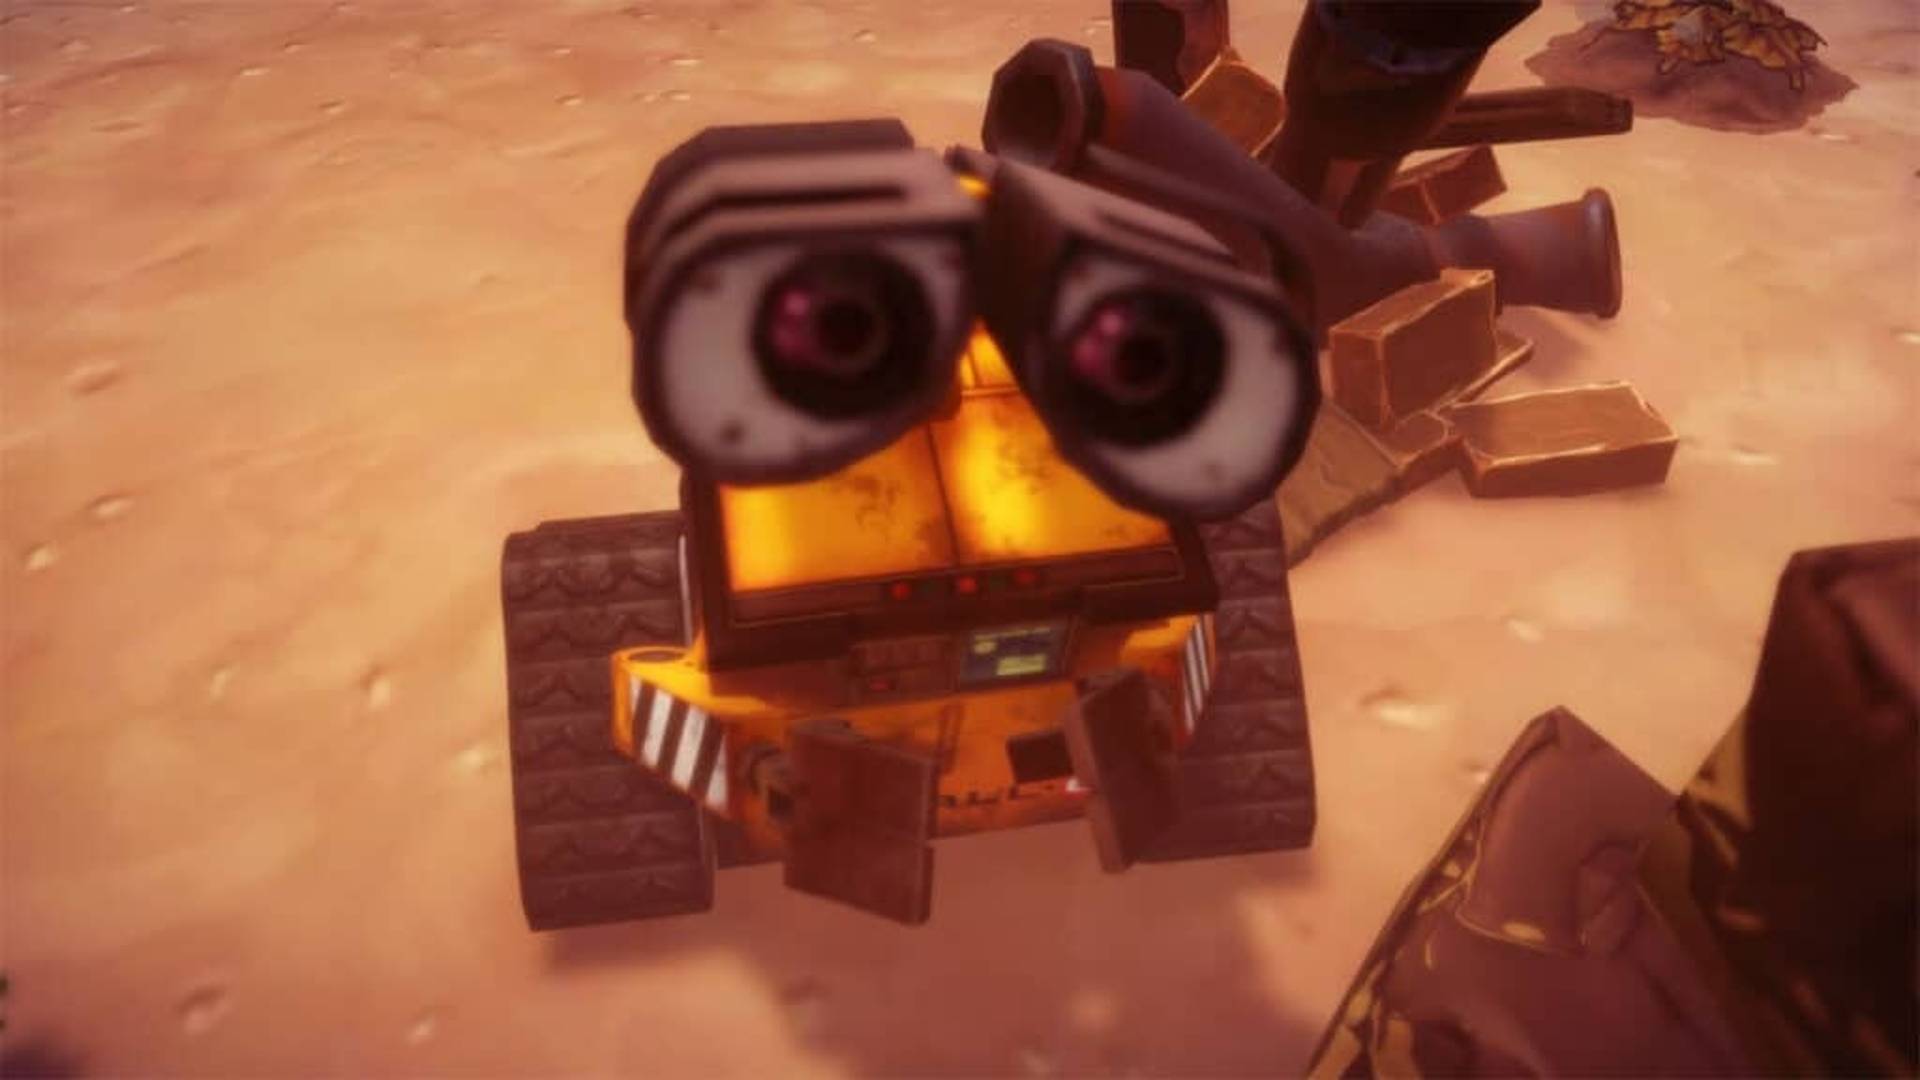 Disney Dreamlight Valley WALL-E fishing has players obsessed